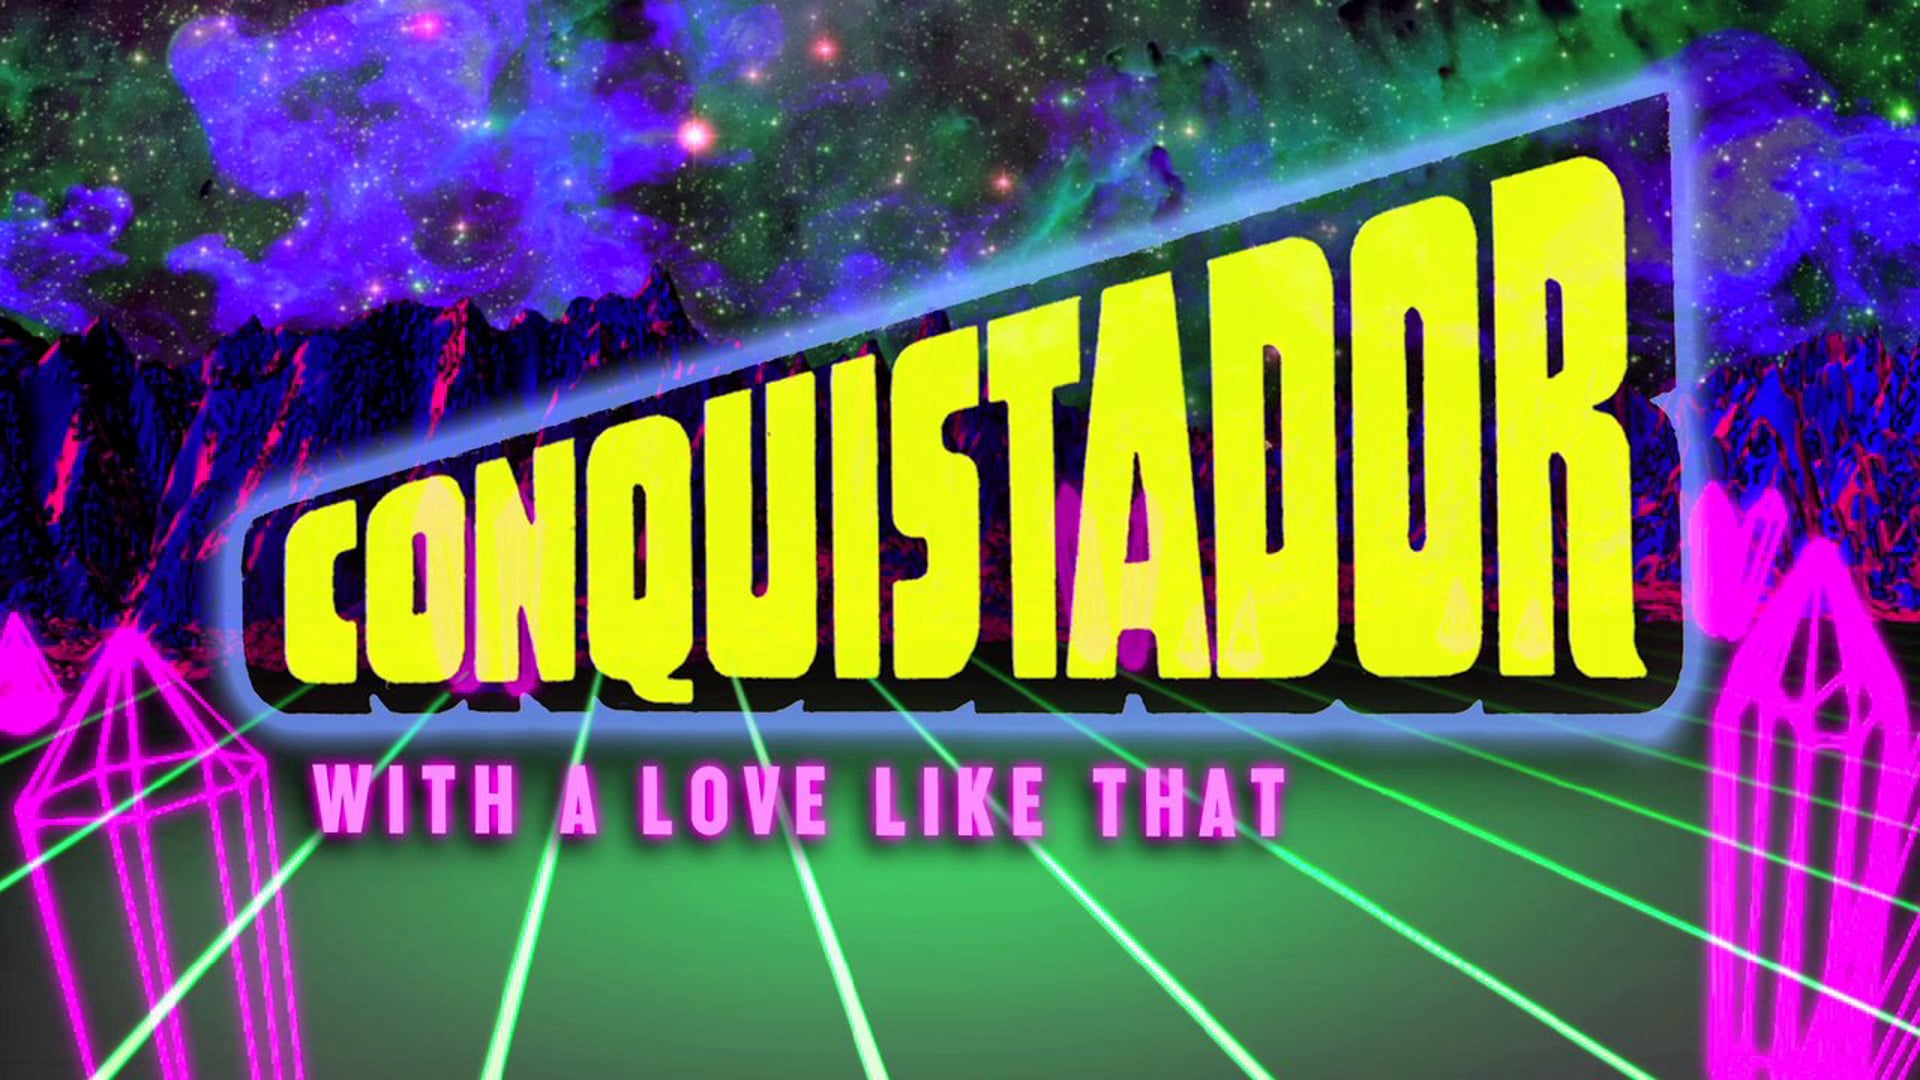 Conquistador- "With A Love Like That"